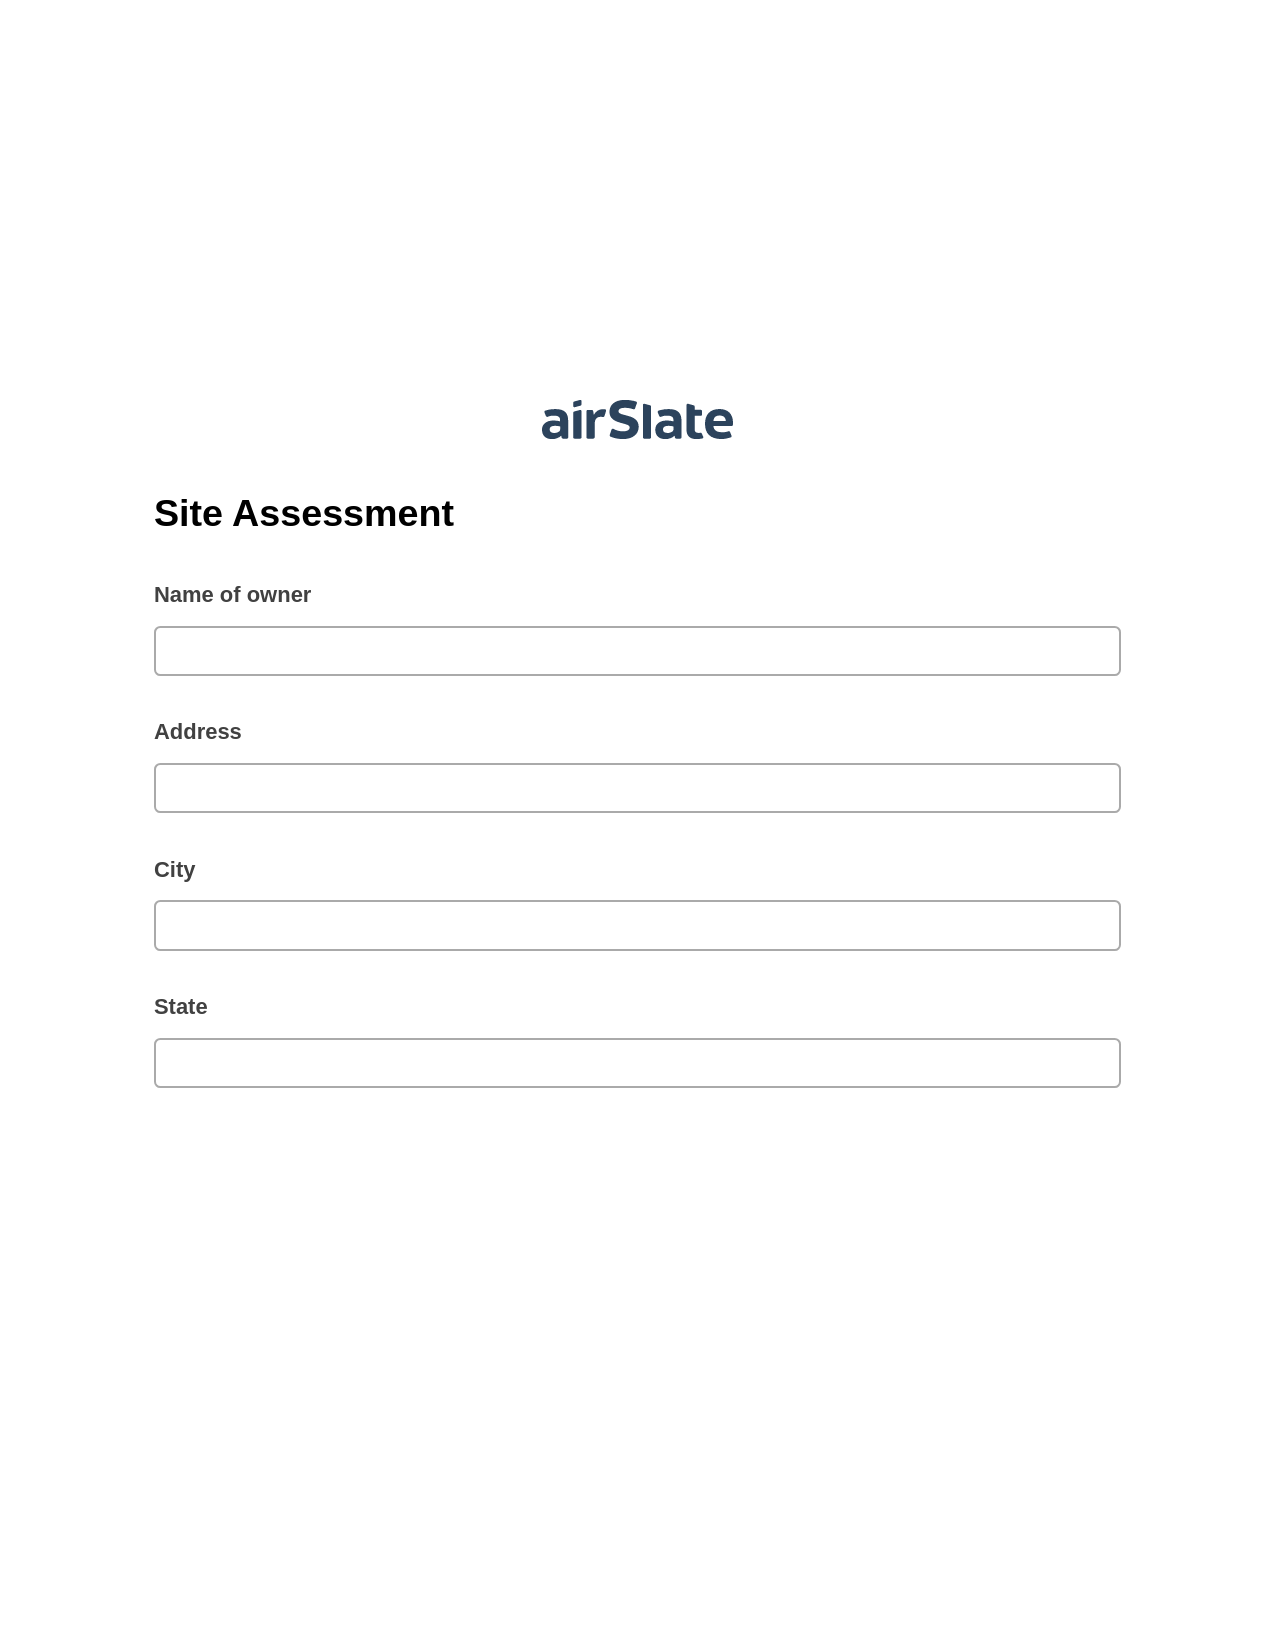 Multirole Site Assessment Pre-fill Slate from MS Dynamics 365 Records Bot, Assign Slate Name Bot, Export to Formstack Documents Bot